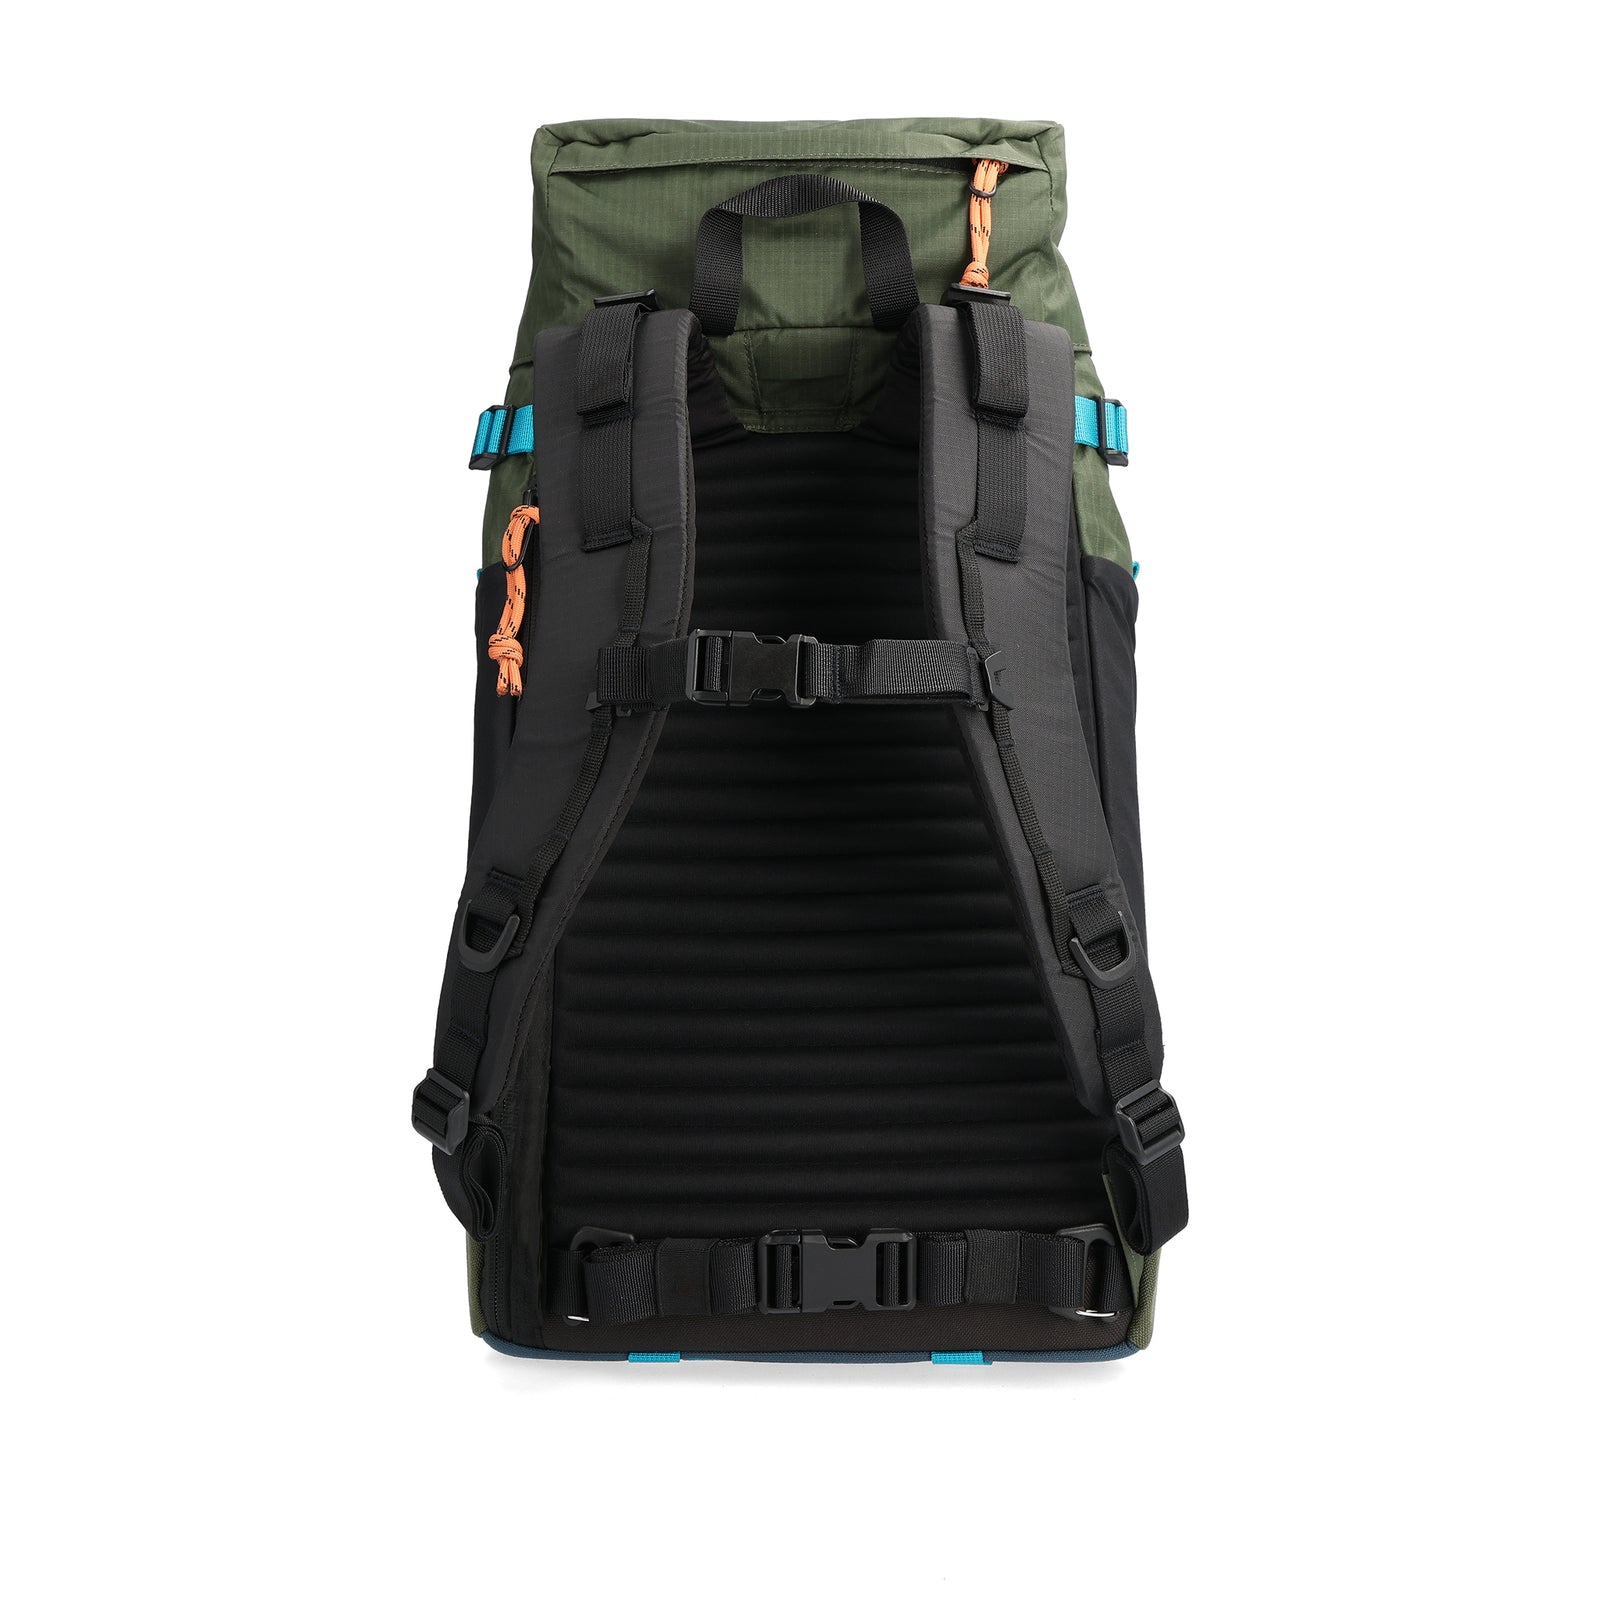 Back View of Topo Designs Mountain Pack 16L 2.0 in "Olive / Hemp"